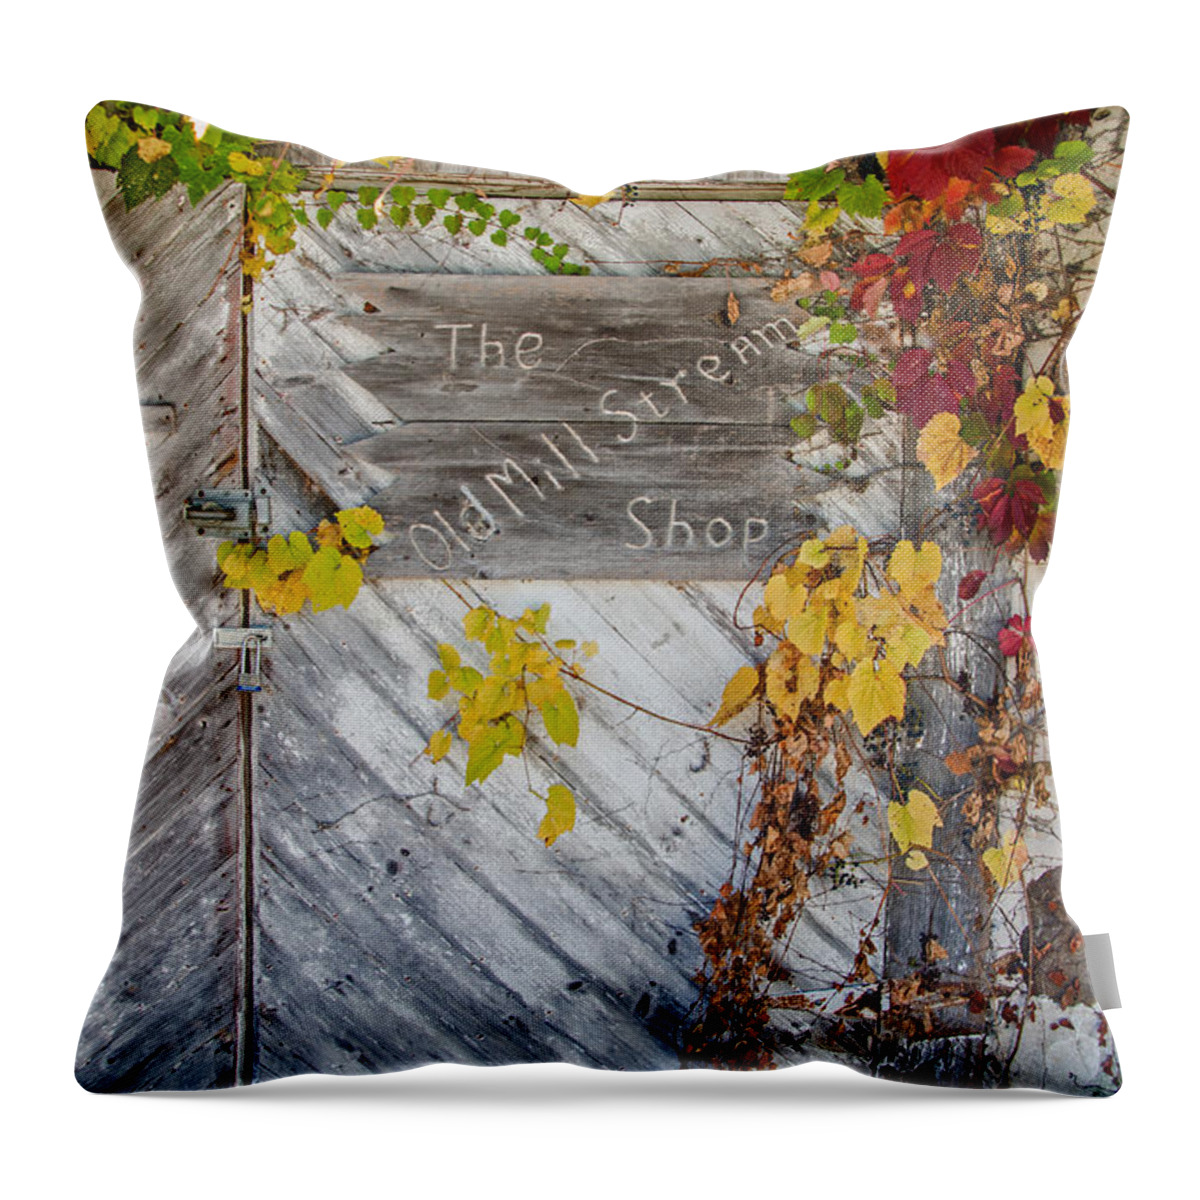 Mill Throw Pillow featuring the photograph The Old Mill Stream Shop by Susan McMenamin